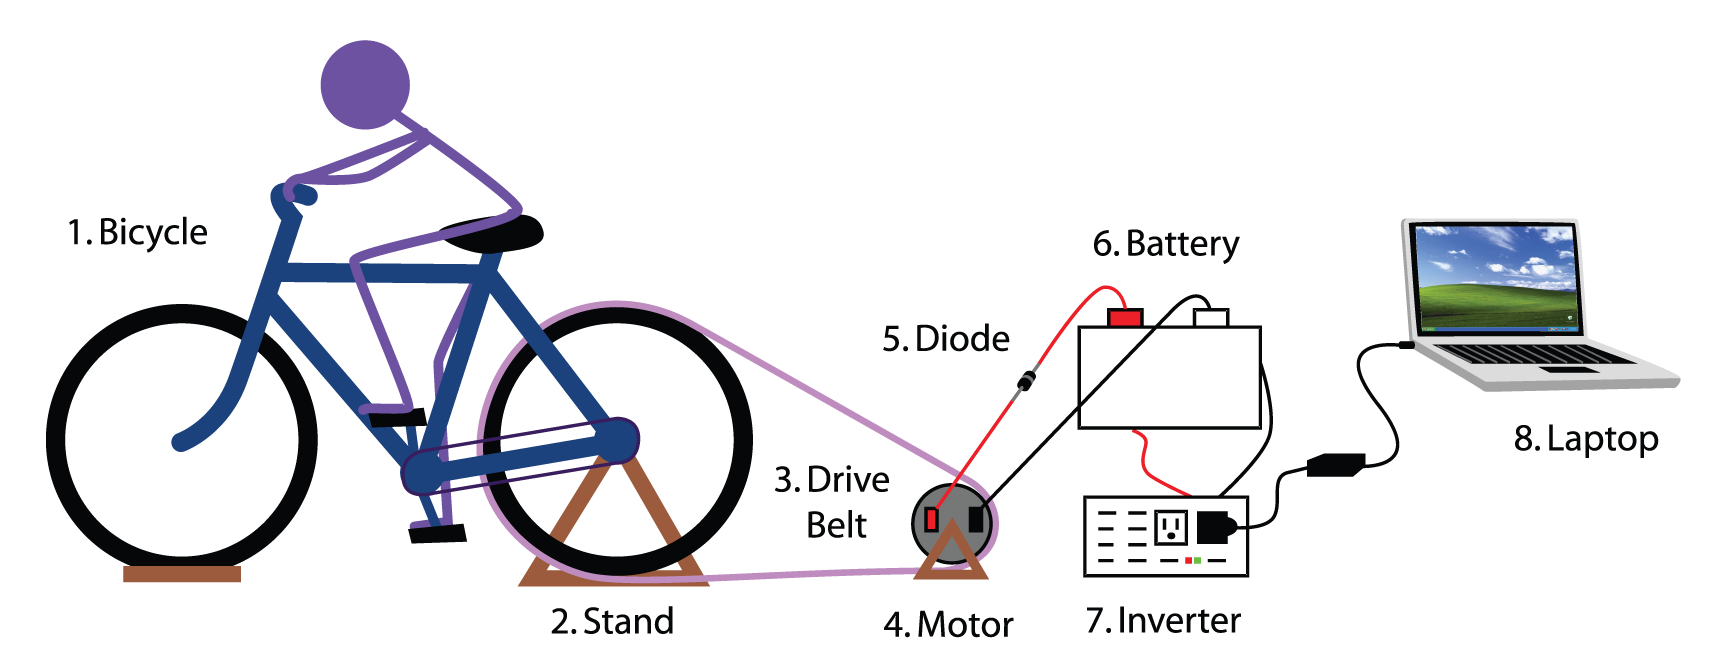 How many volts does a bicycle dynamo produce?